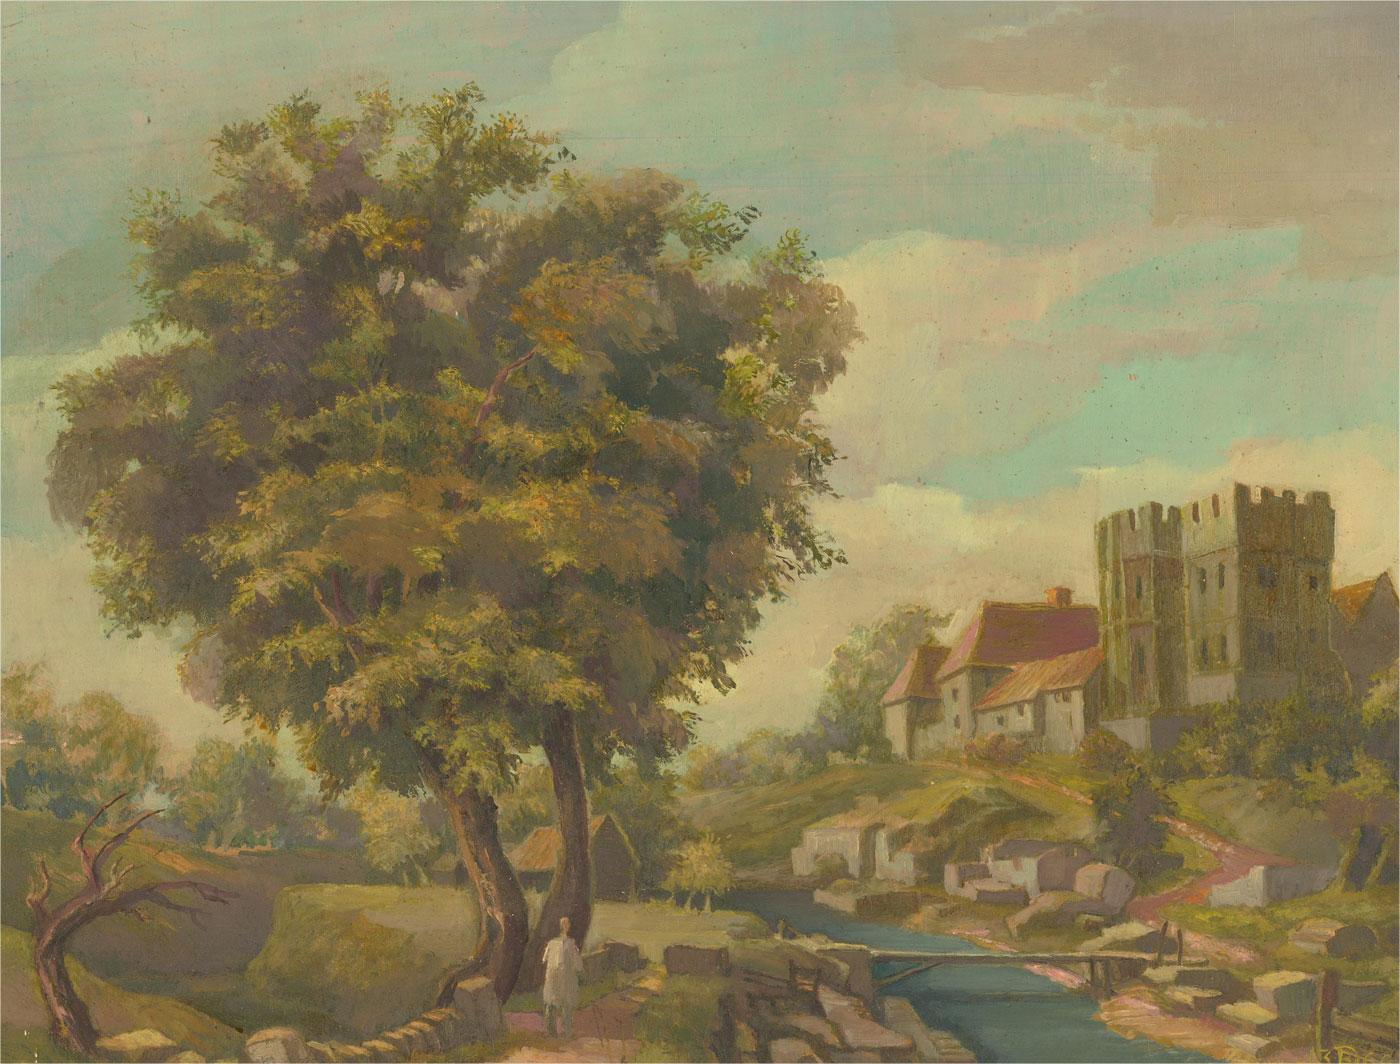 An idyllic country landscape depicting a small castle beside a river. A man walks along the path in the foreground. Monogrammed and dated to the lower-right corner. On panel.